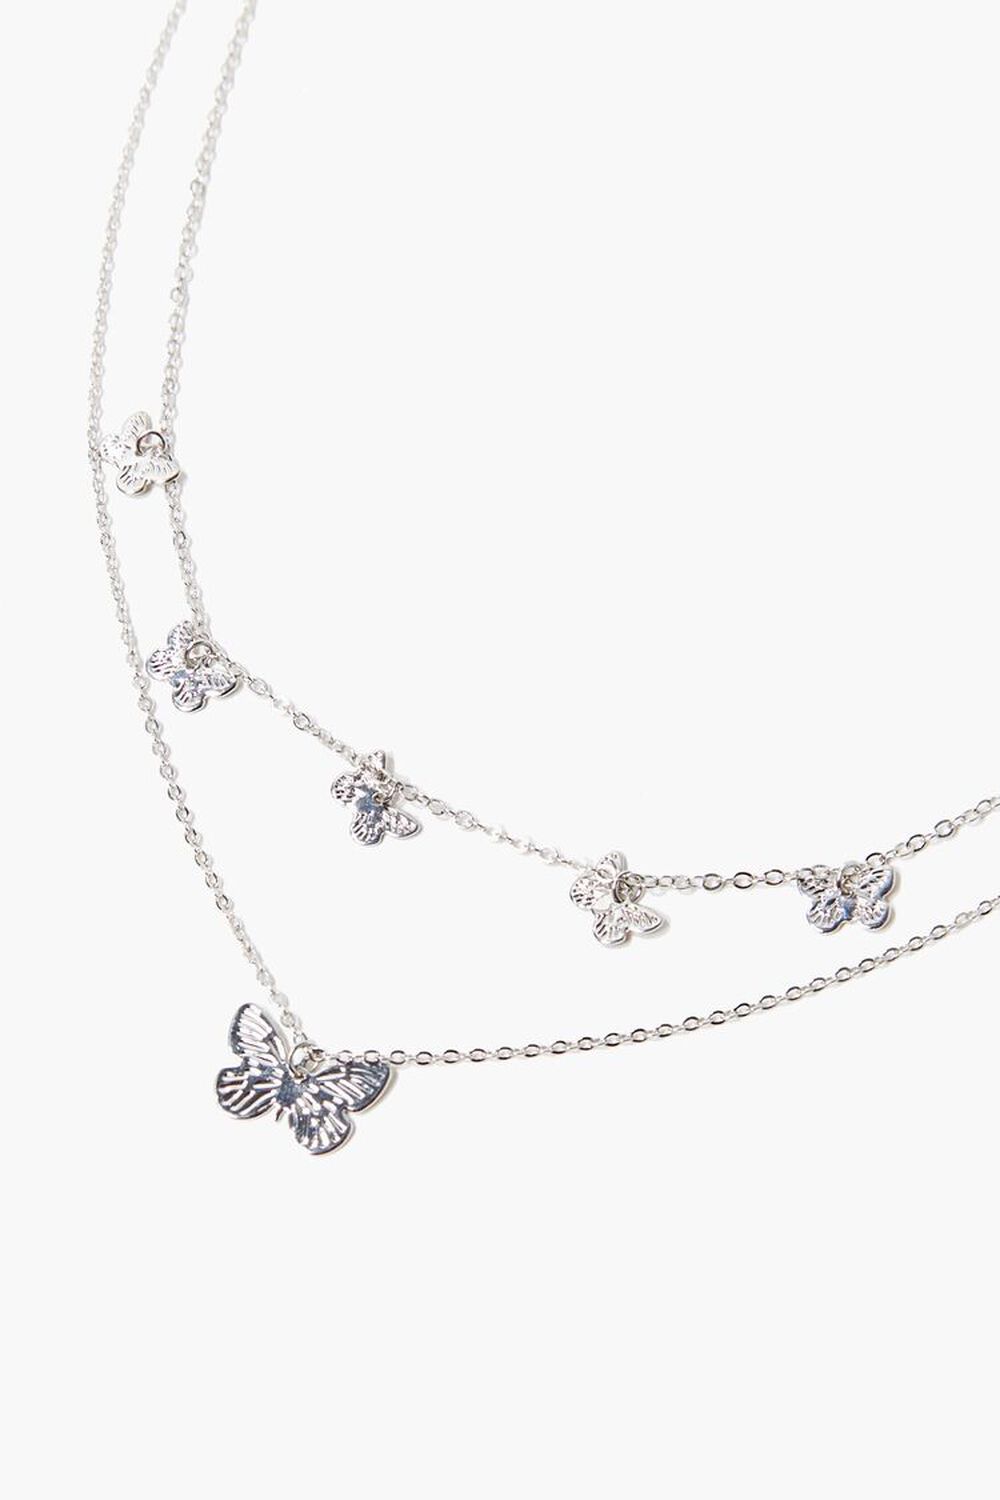 SILVER Butterfly Charm Layered Necklace, image 1